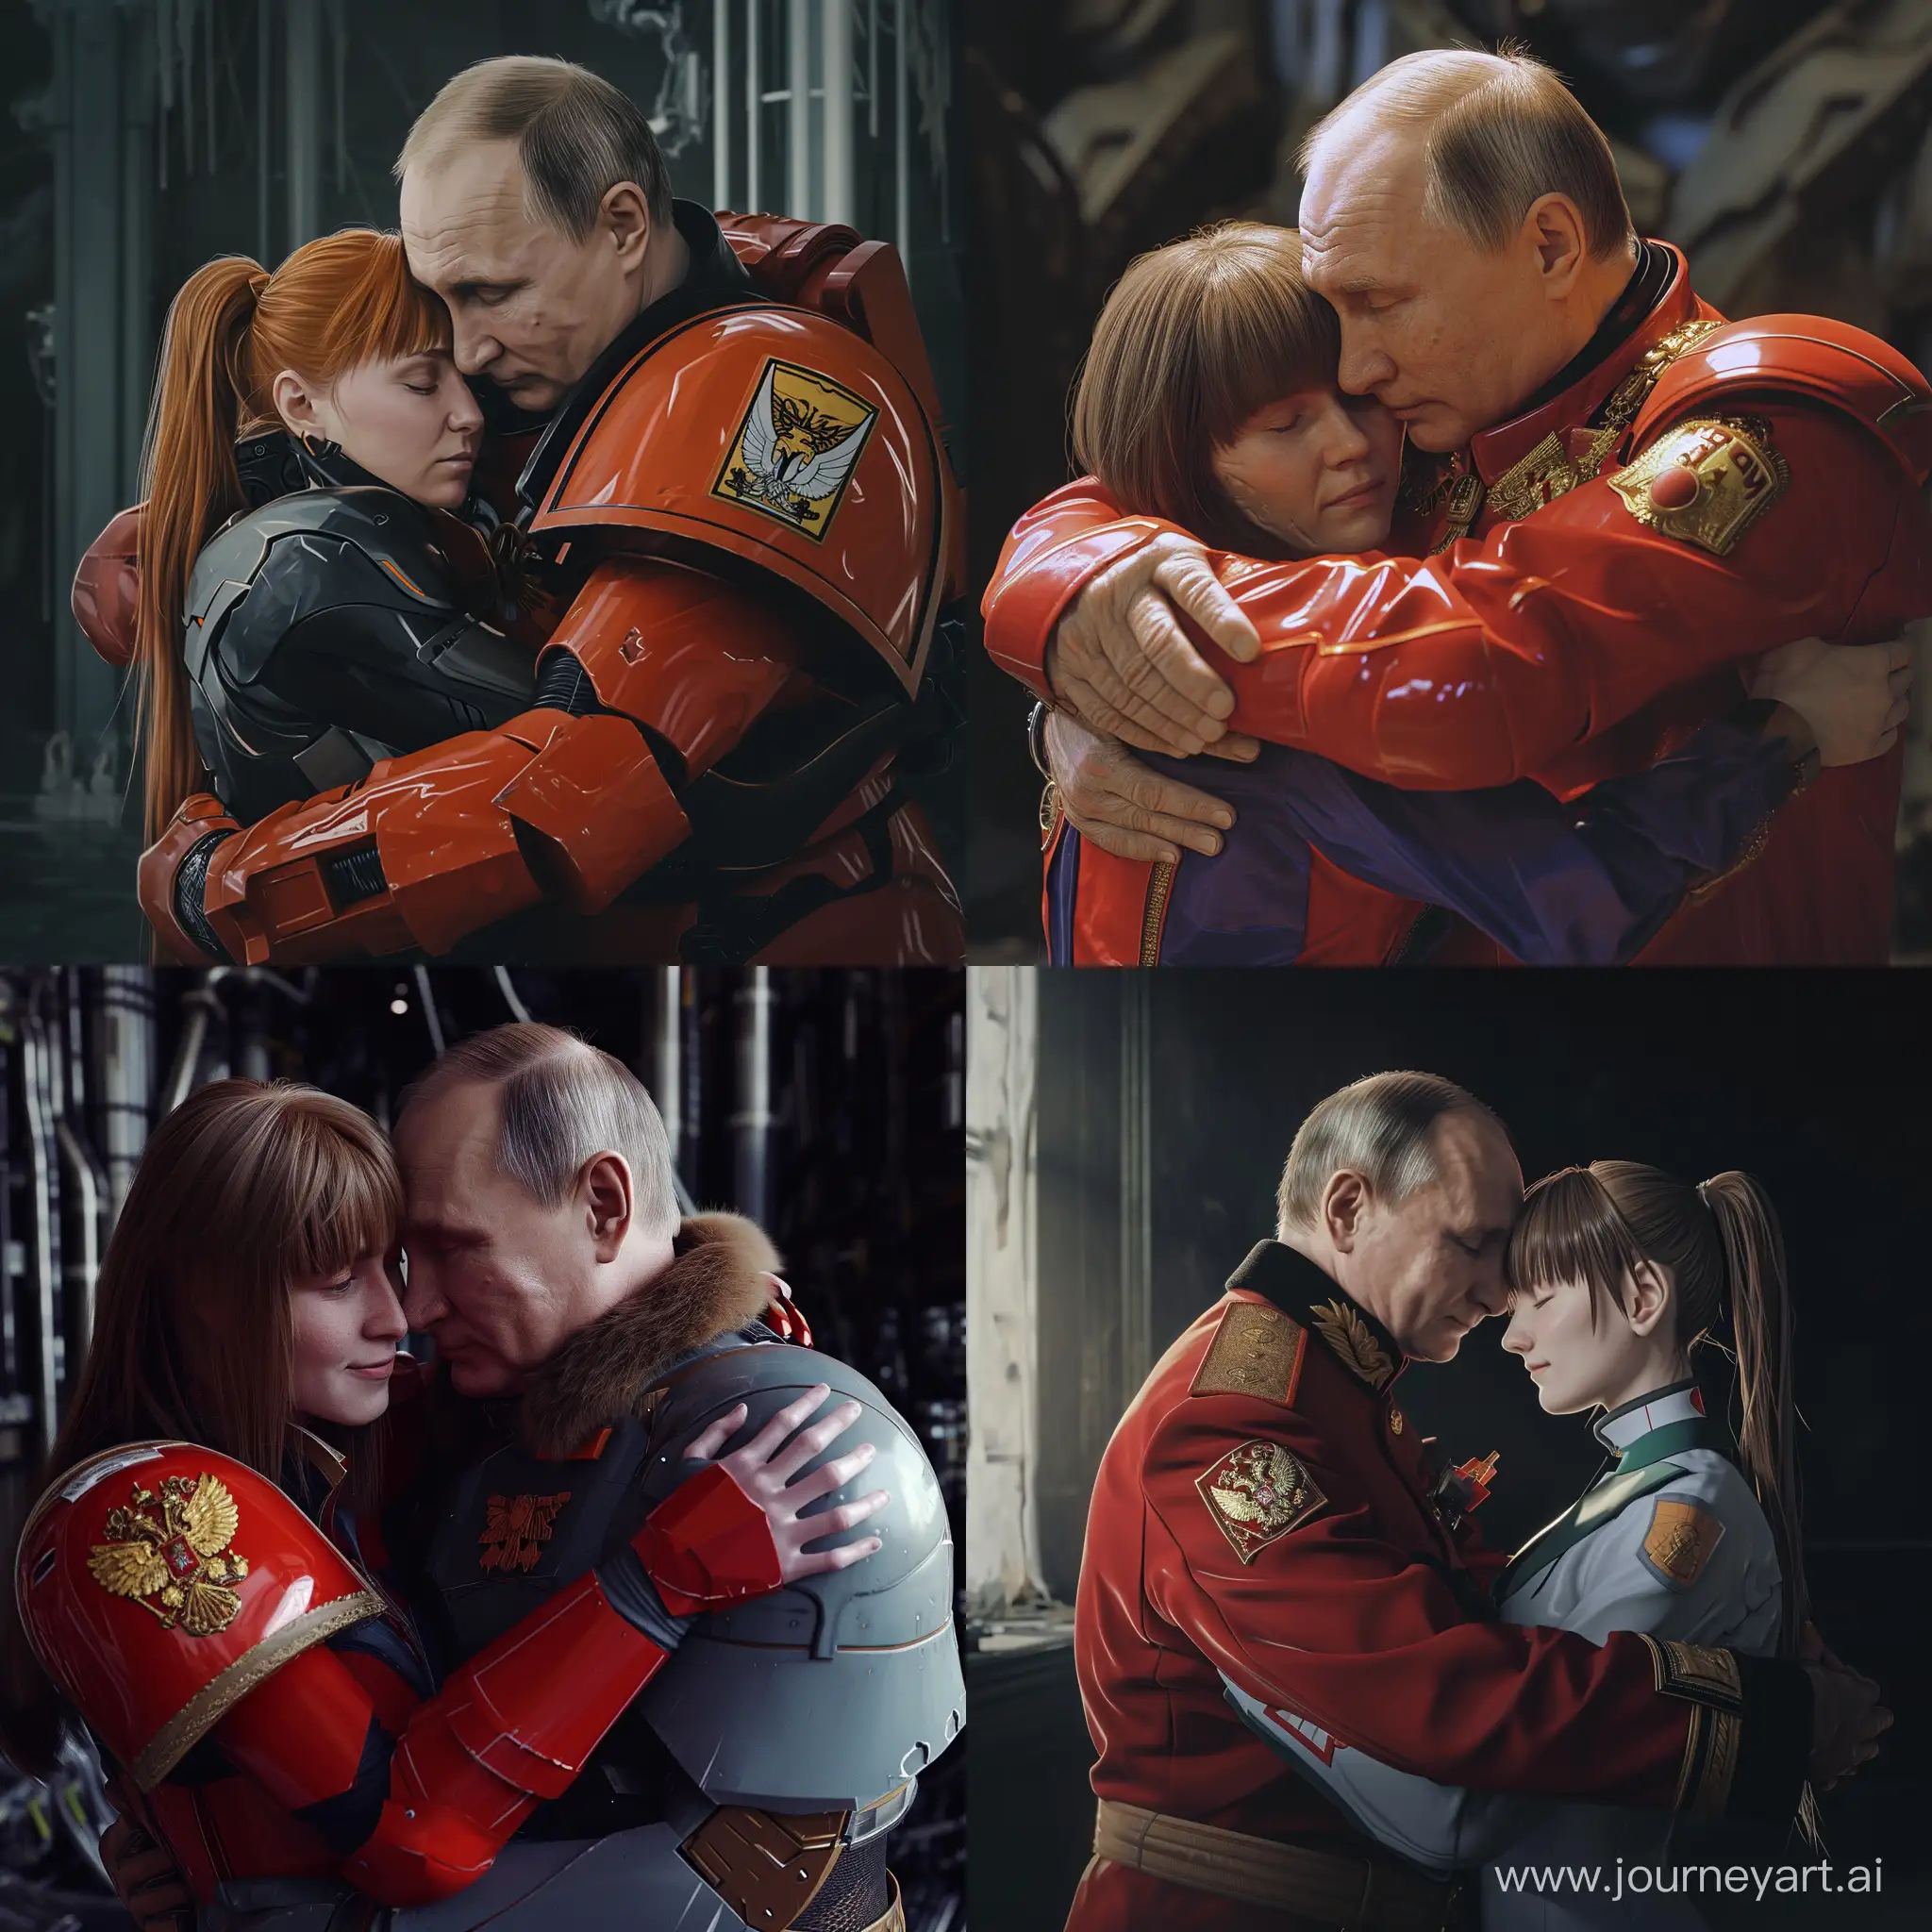 President Putin in the image of the God Emperor from the Warhammer 40,000 universe embraces Ayanami Rei from the anime Evangelion Ultra Realism 8K HD detailed